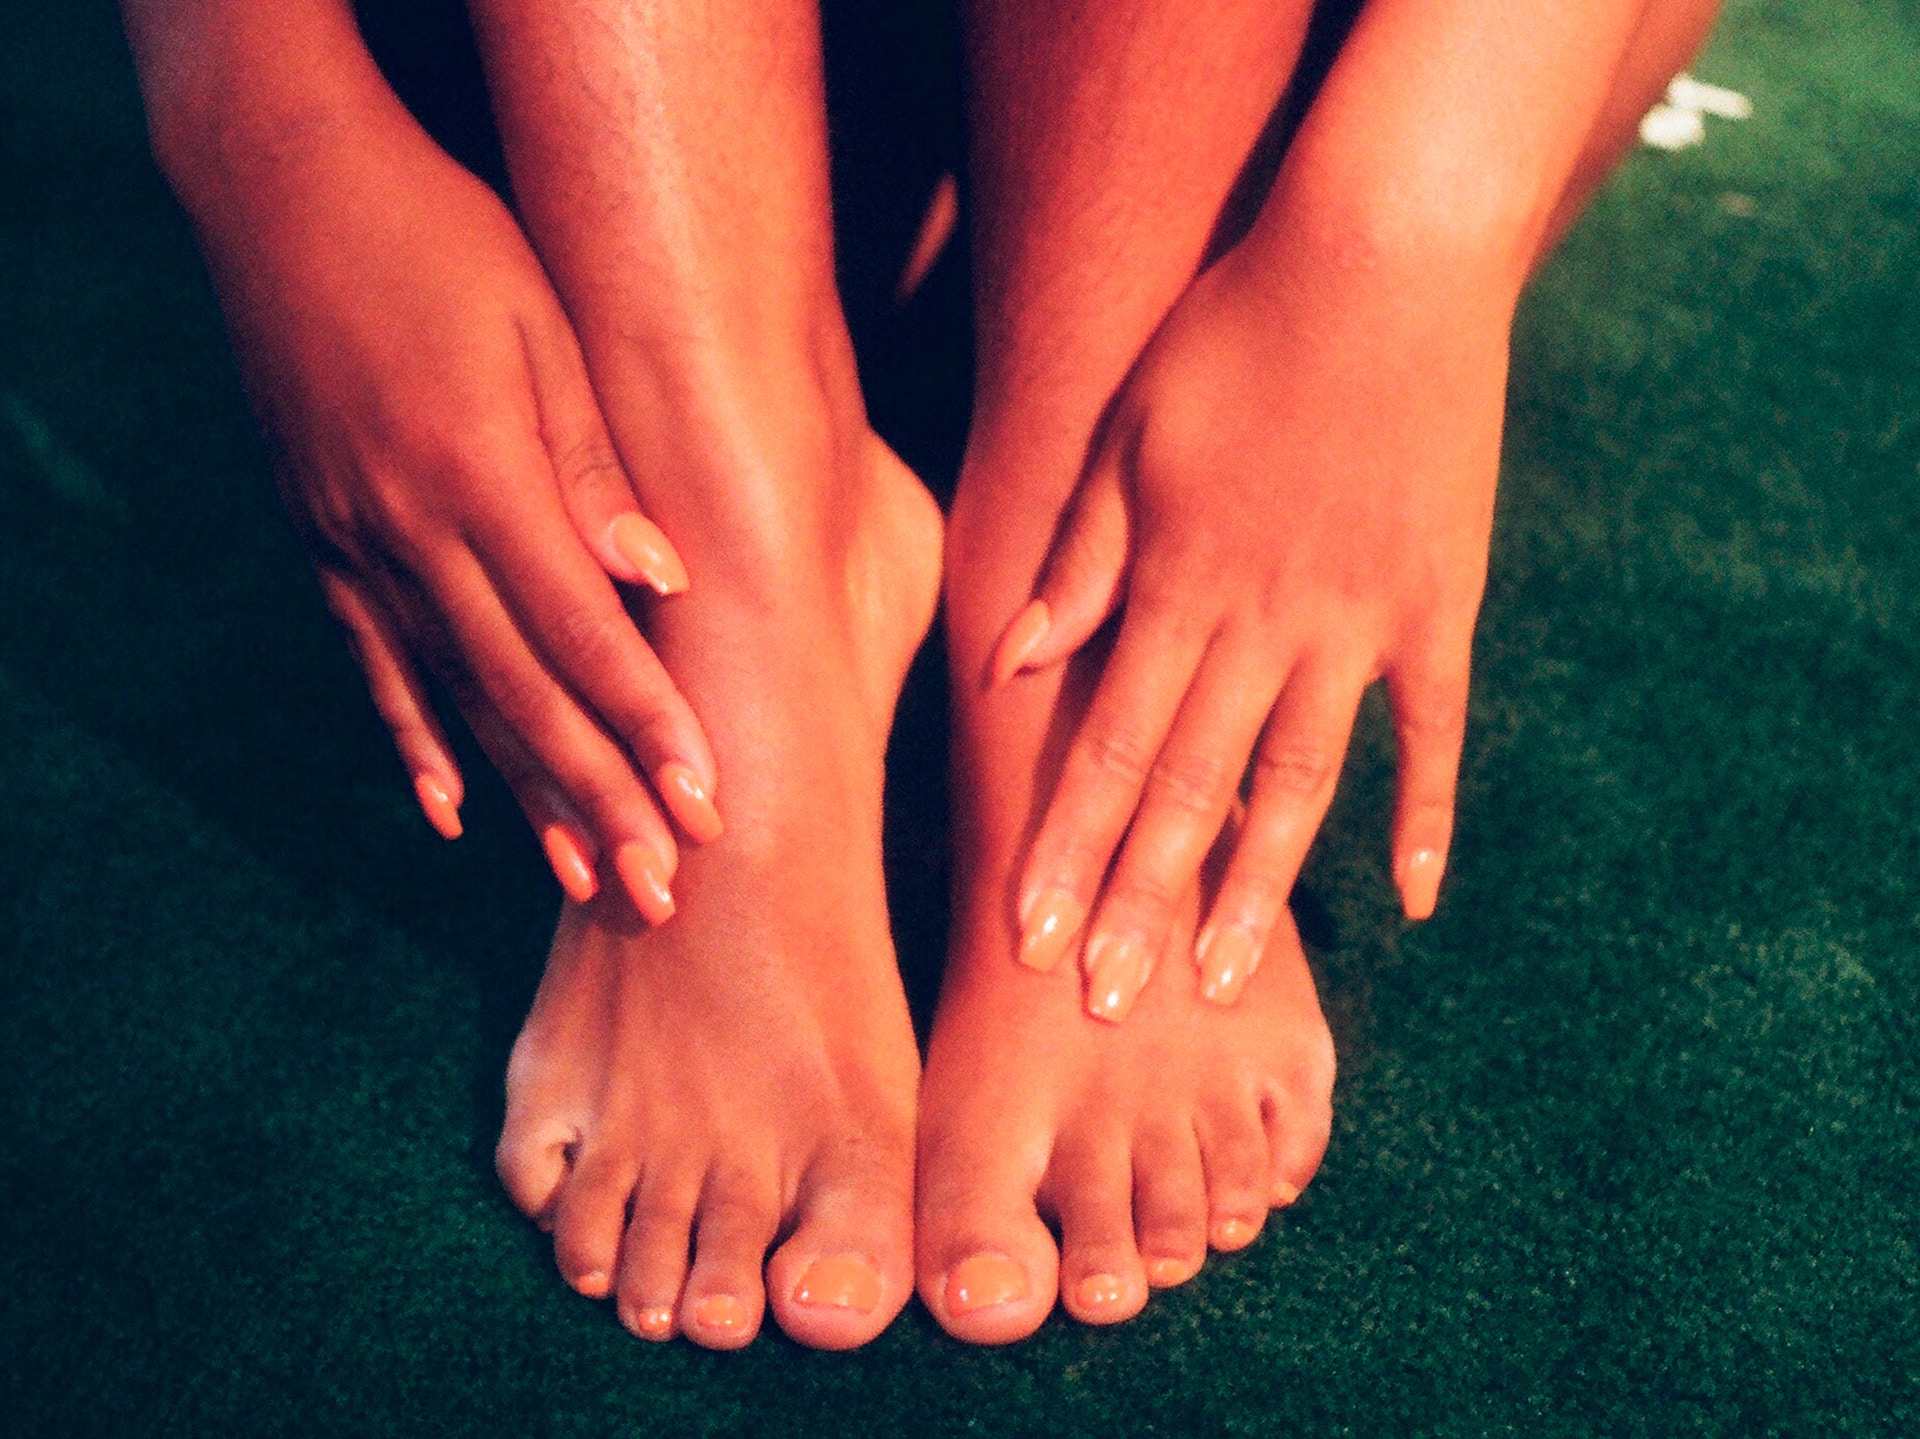 Don't feel like getting a pedicure? Make these simple feet scrubs at home  instead